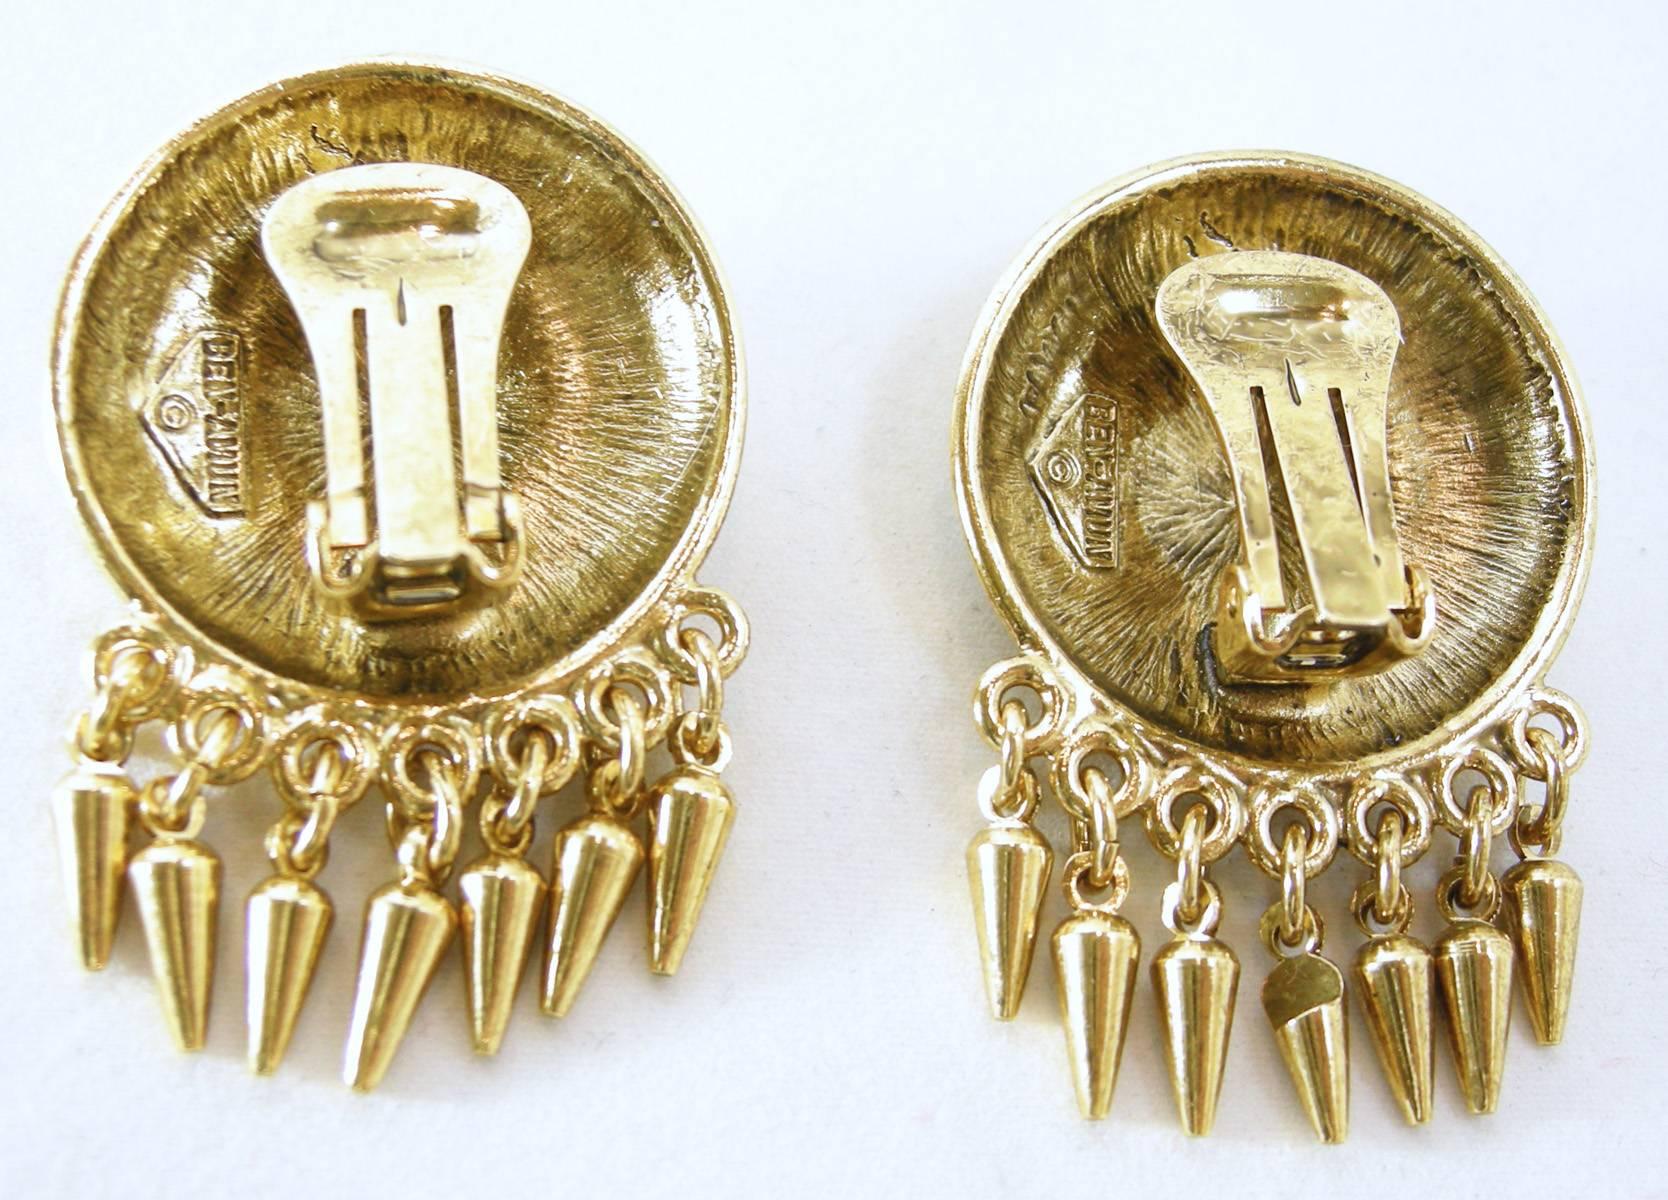 These beautiful vintage Ben-Amun gold tone dangling clip earrings are stunning.  They have a 3-dimensional swirl design with 7 dangling spikes hanging down.  They measure 1-1/4” wide x 1-1/2” long.  They are signed “Ben-Amun” and in excellent